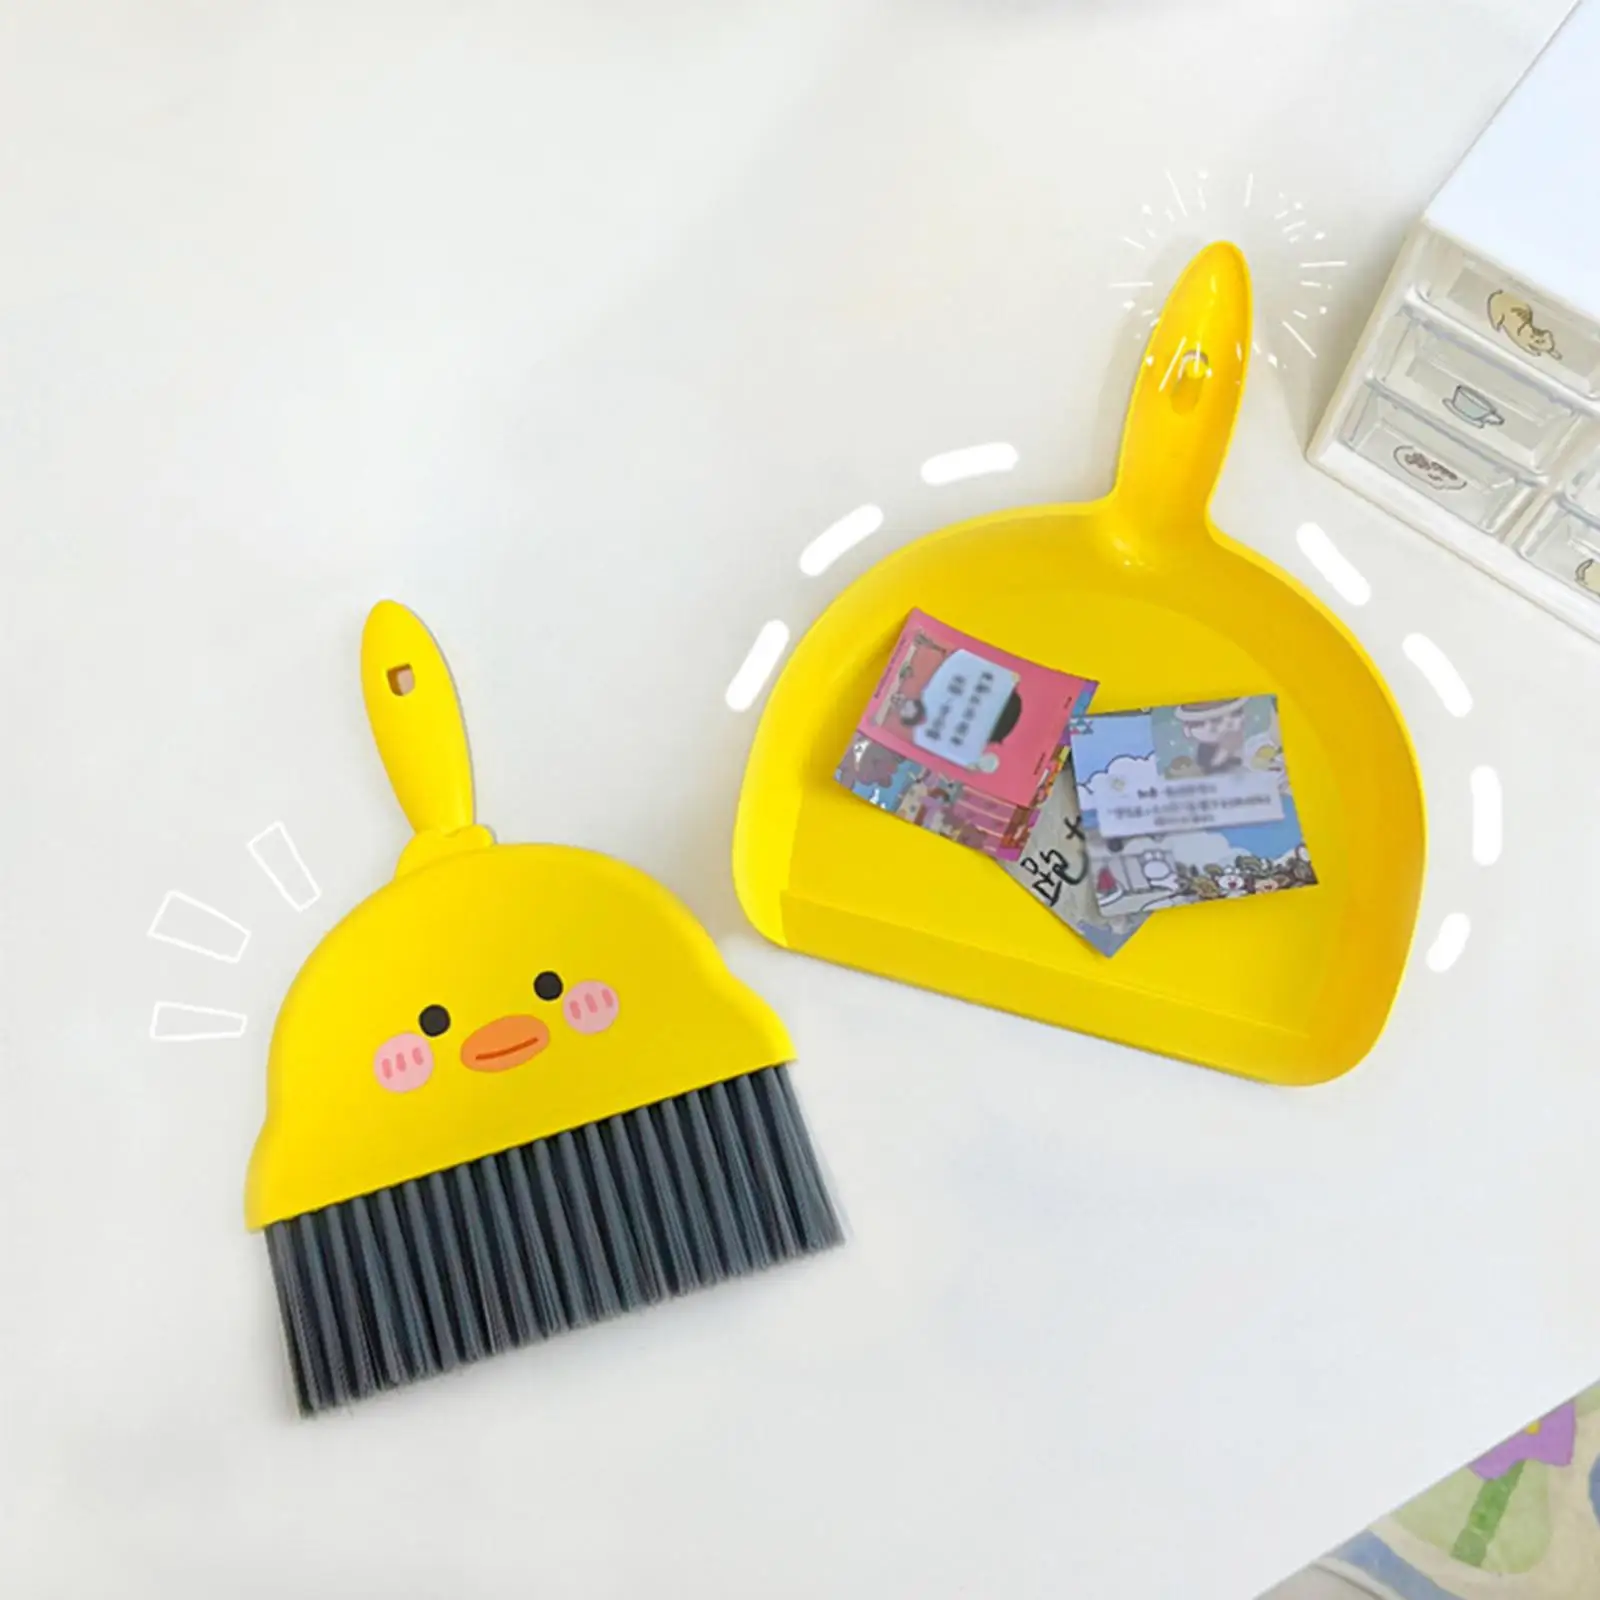 Mini Broom and Dustpan Set Desktop Pretend Play Toy for for Little Housekeeping Helper Sets Gift for Home Bedroom Living Room